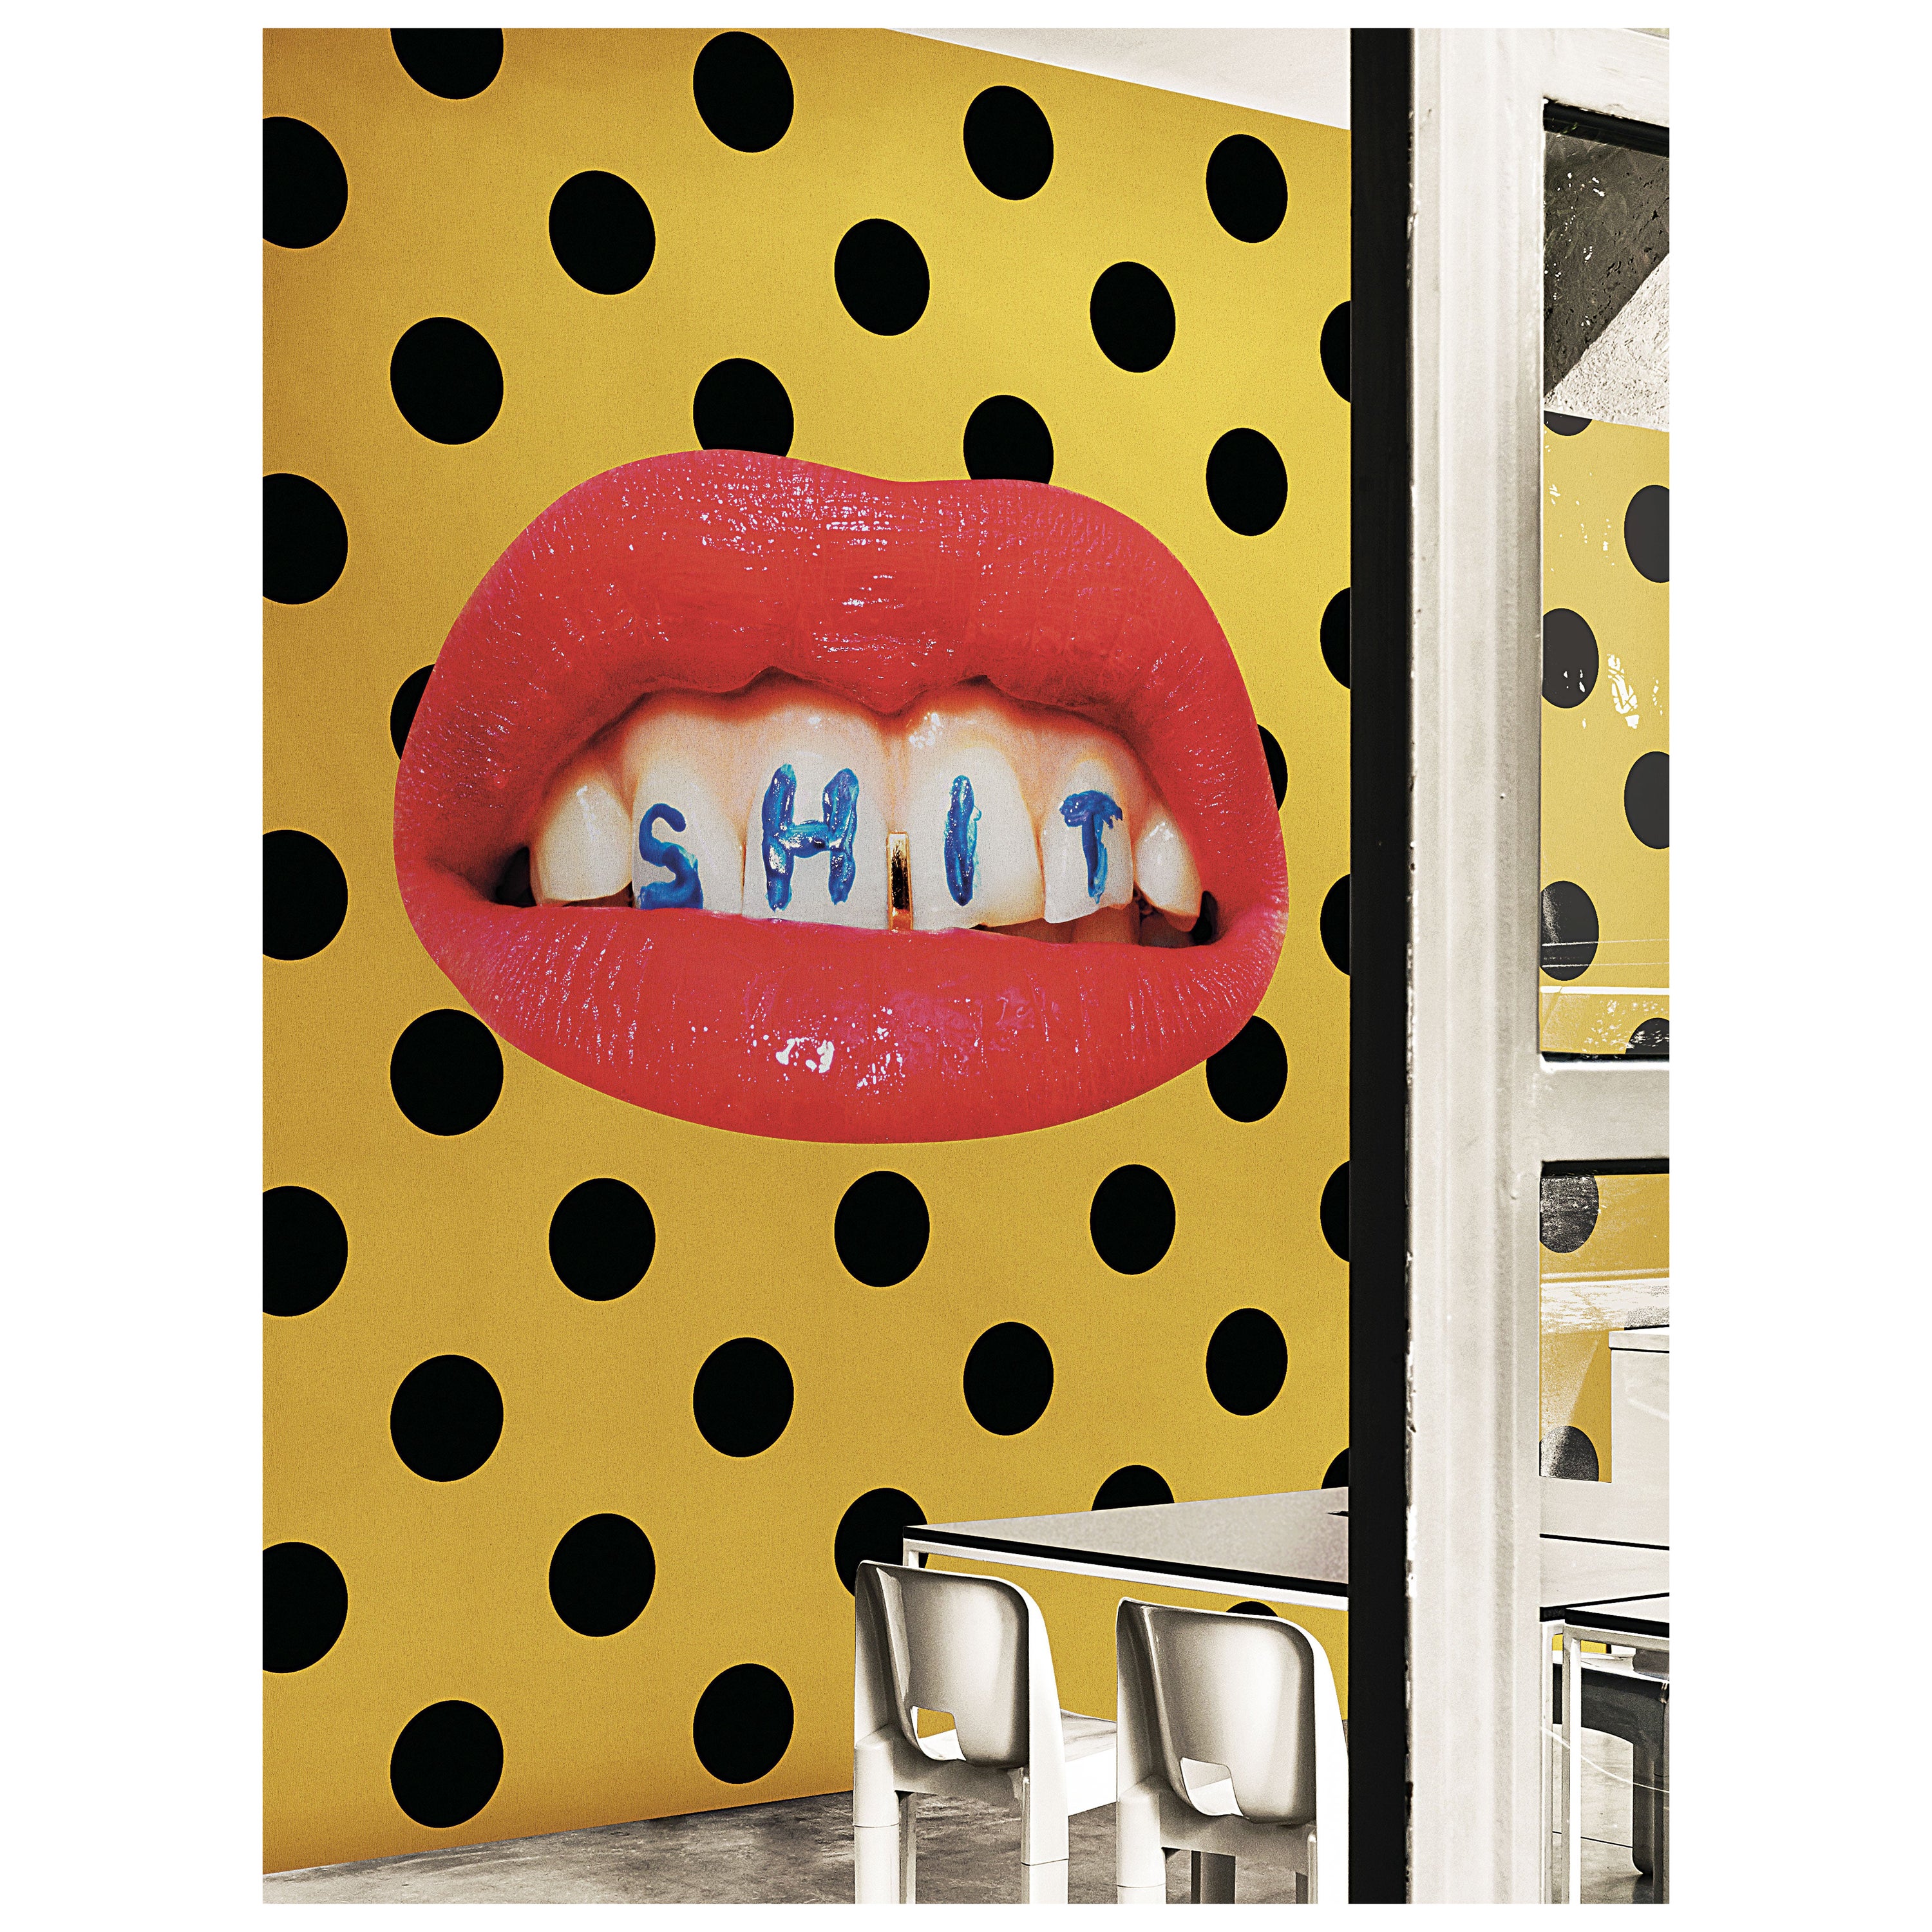 LondonArt Exclusive Wallpaper, 02TP 01 Wash Your Mouth For Sale